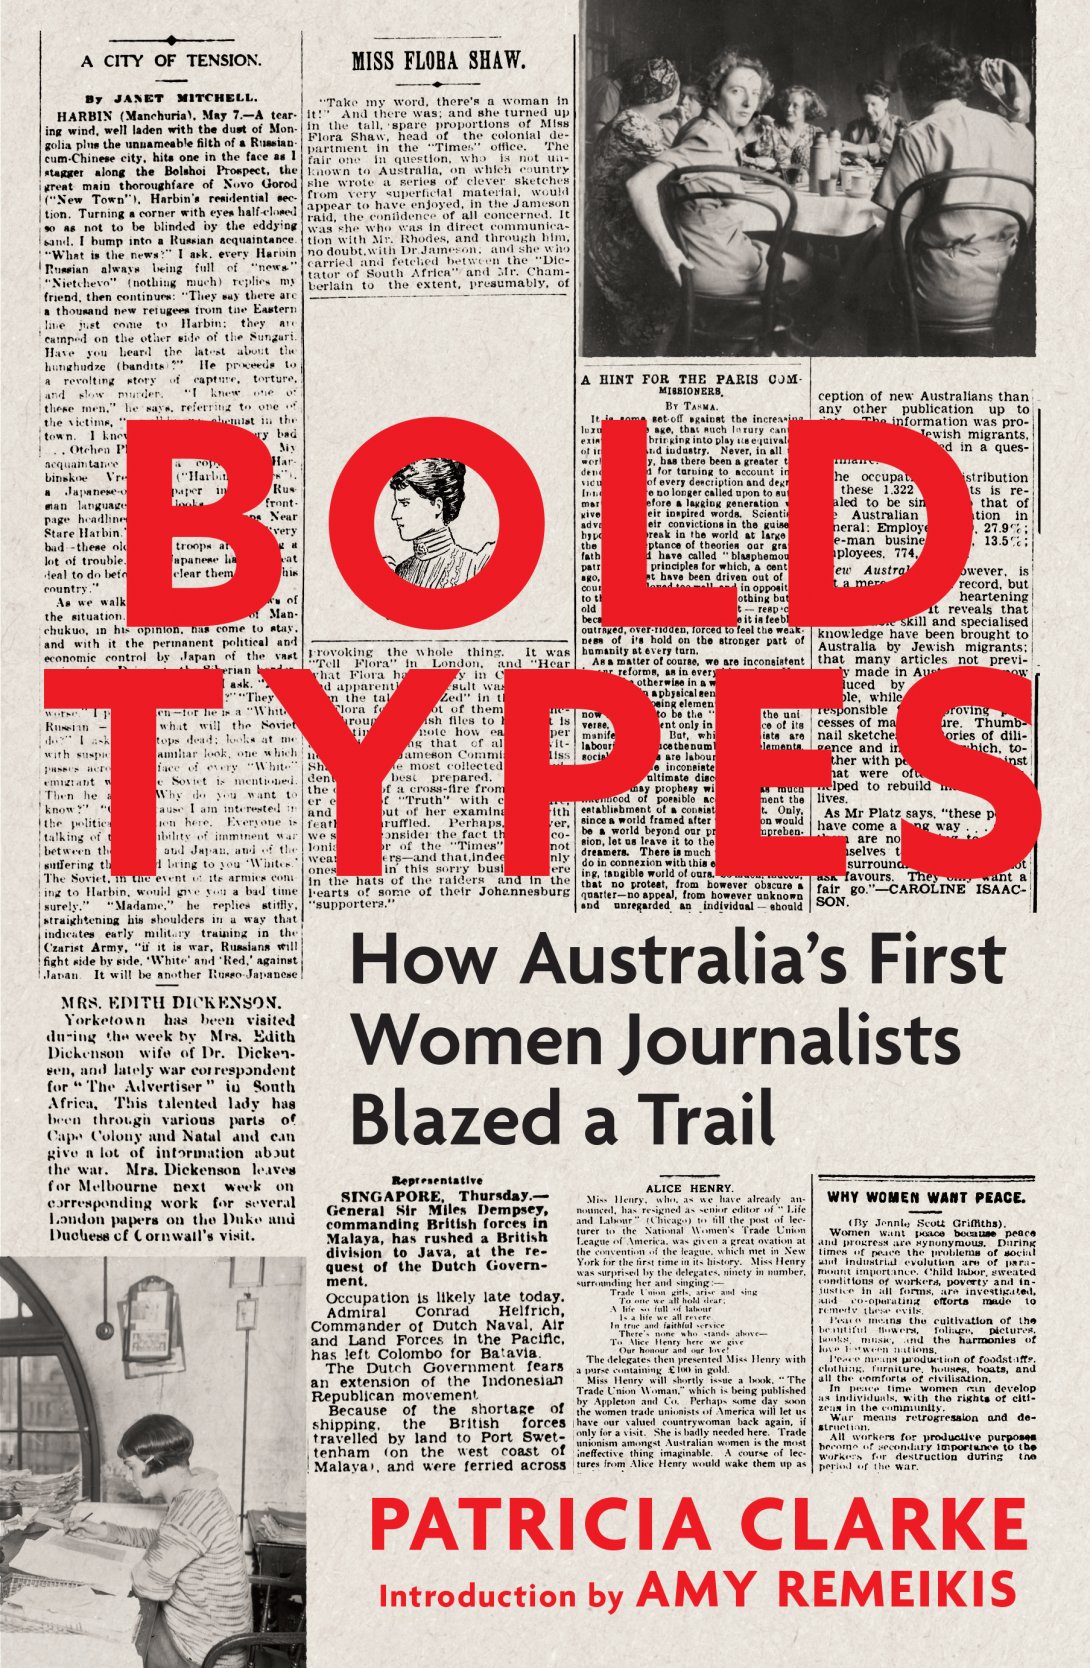 Bold Types book cover